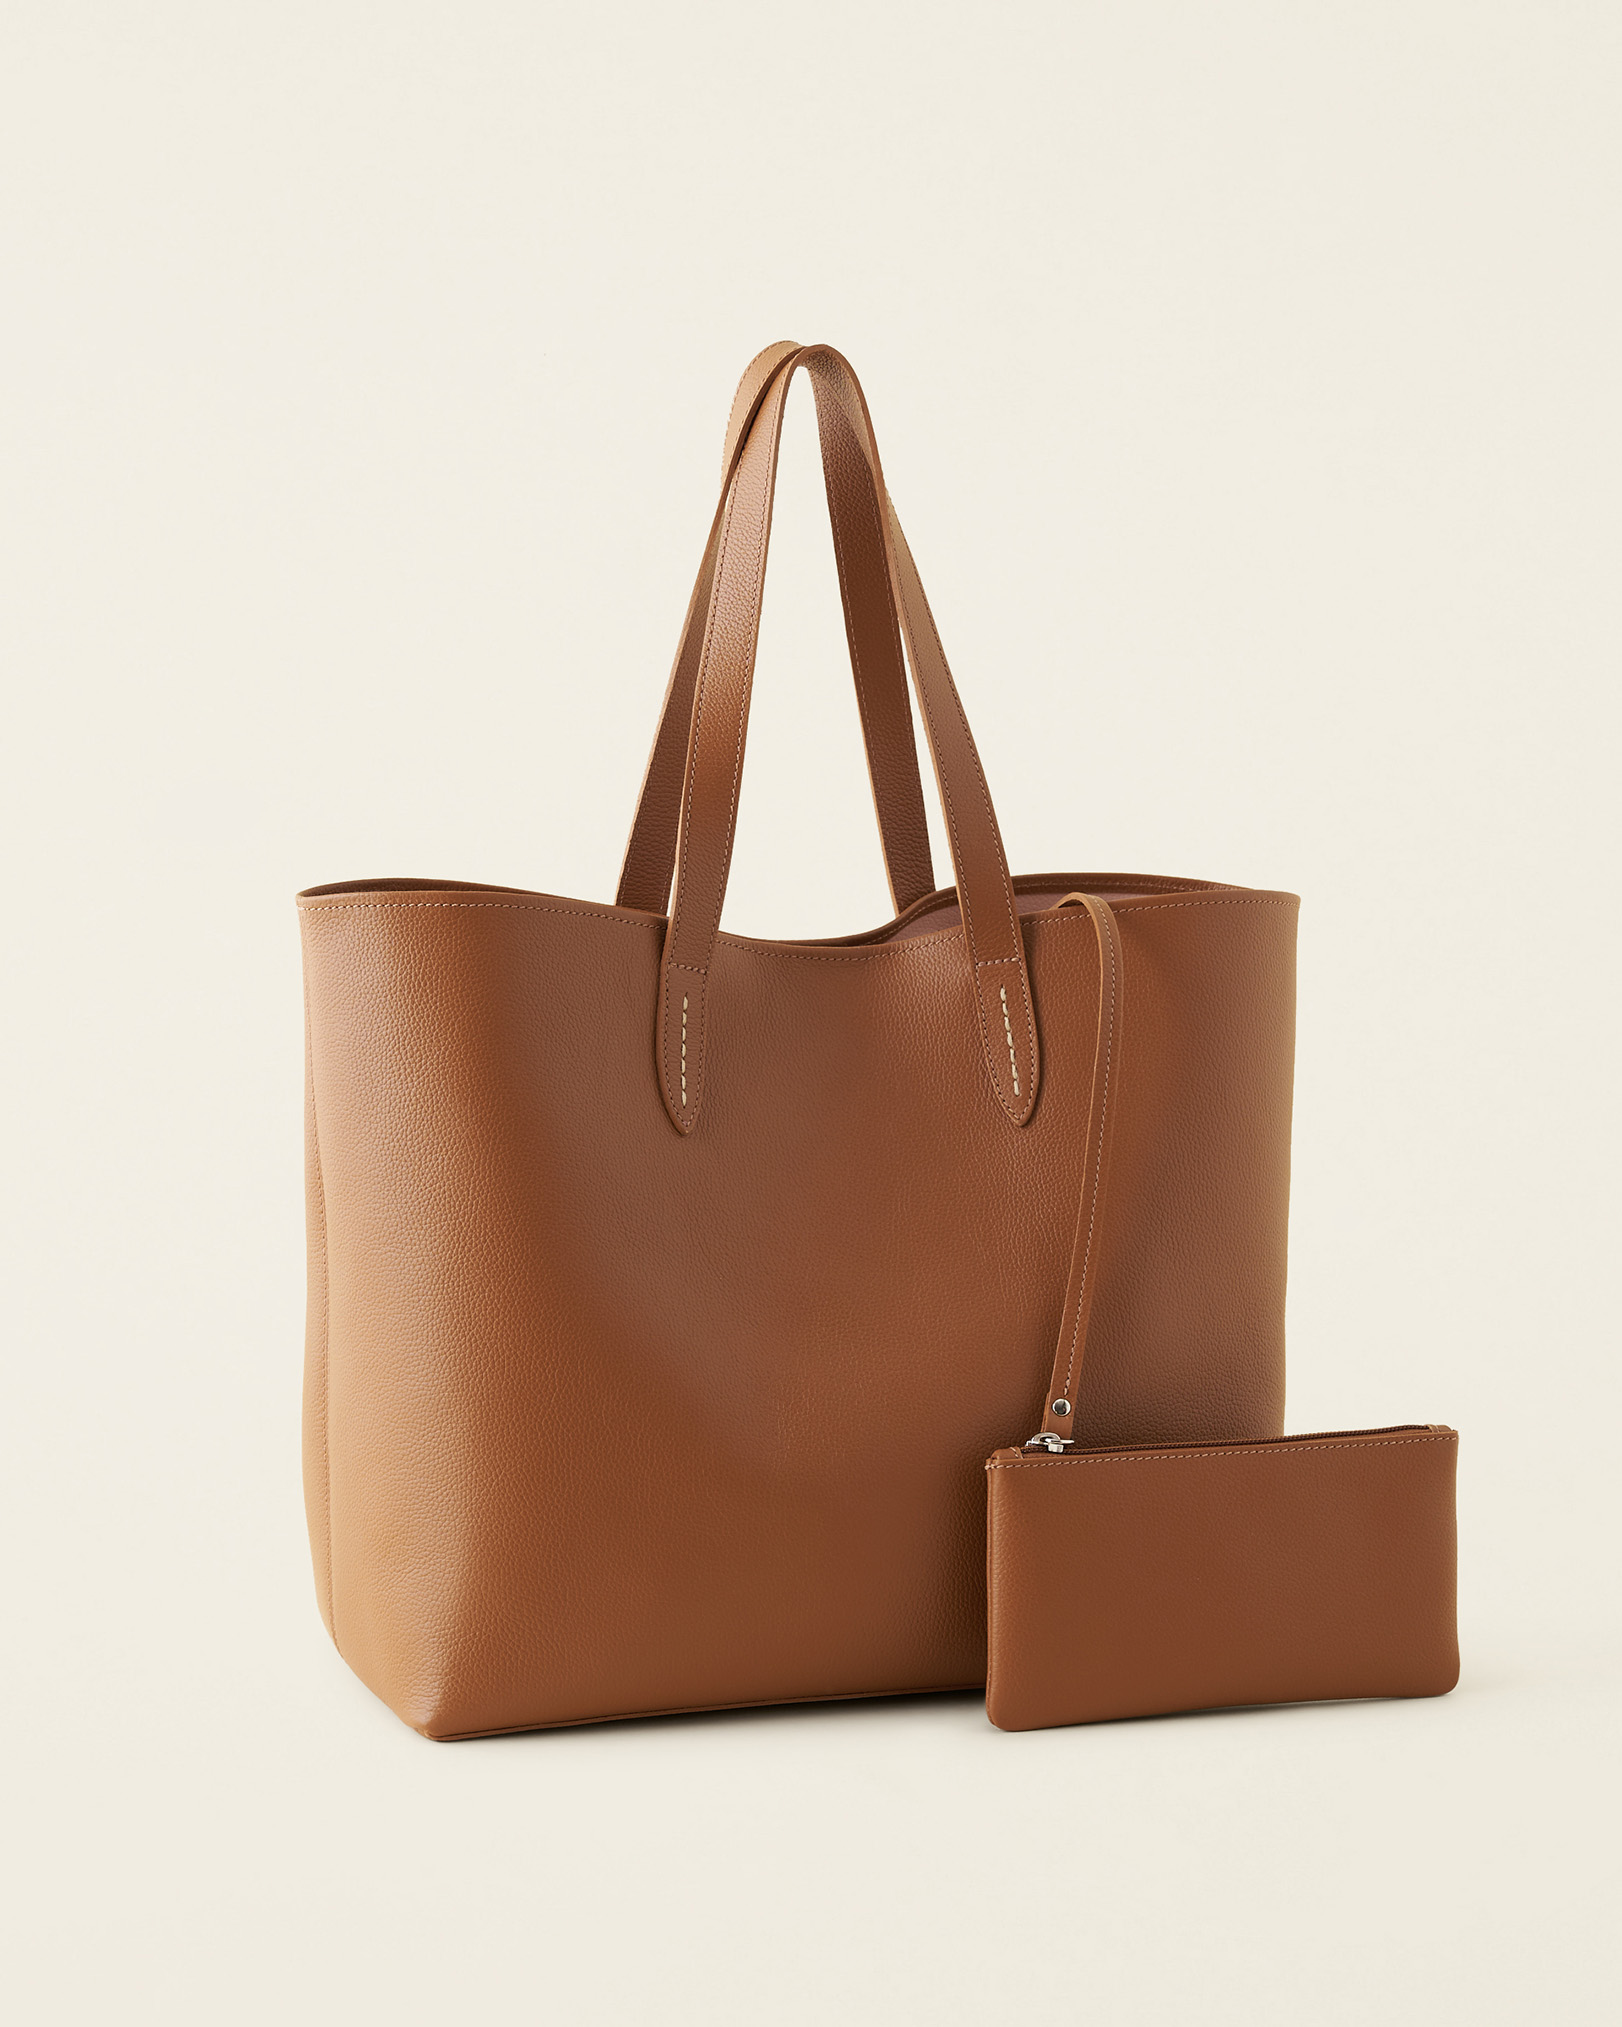 Roots Carryall Tote Cervino in Tan/Powder Pink